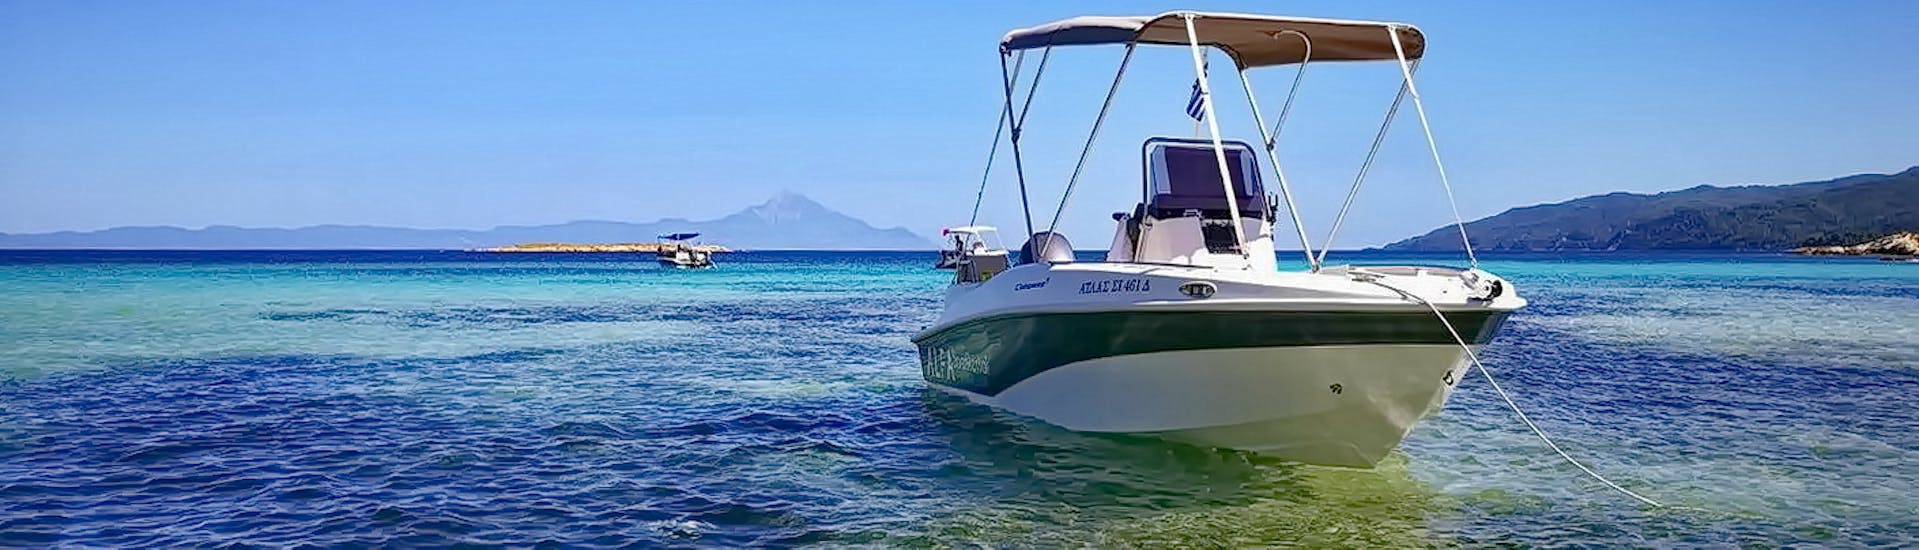 The boat is on the crystal clear waters of the region during the Boat Rental in Vourvourou (up to 5 people) without Licence with Alfa Boat Rental﻿ Vourvourou.